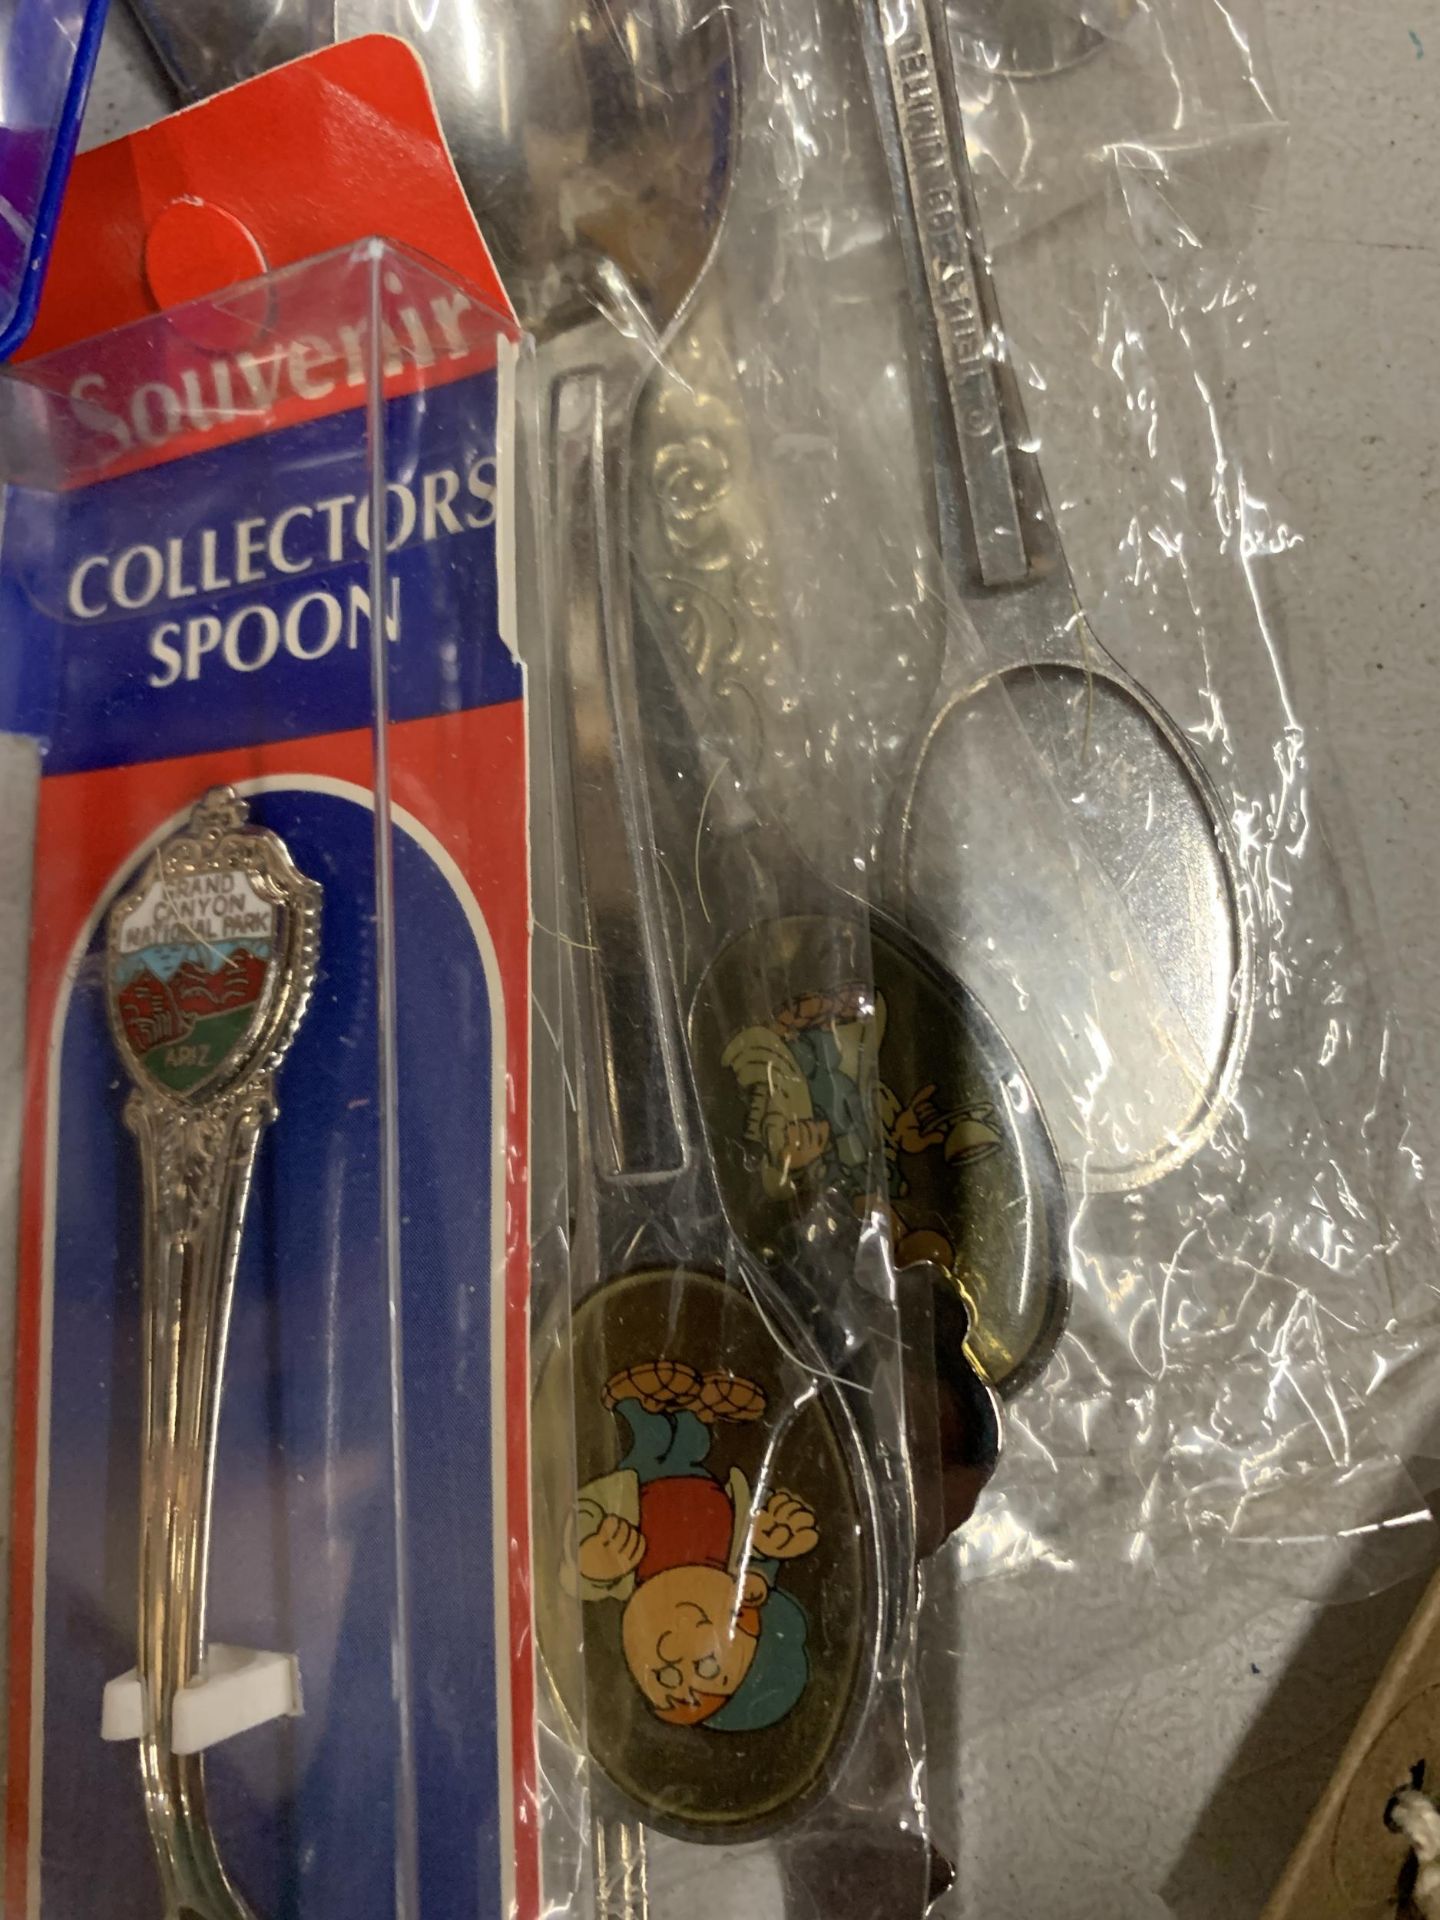 A LARGE COLLECTION OF COLLECTOR SPOONS ( SOME SILVER PLATED ) TO INCLUDE "THE GRAND CANYON" "THE - Image 4 of 4